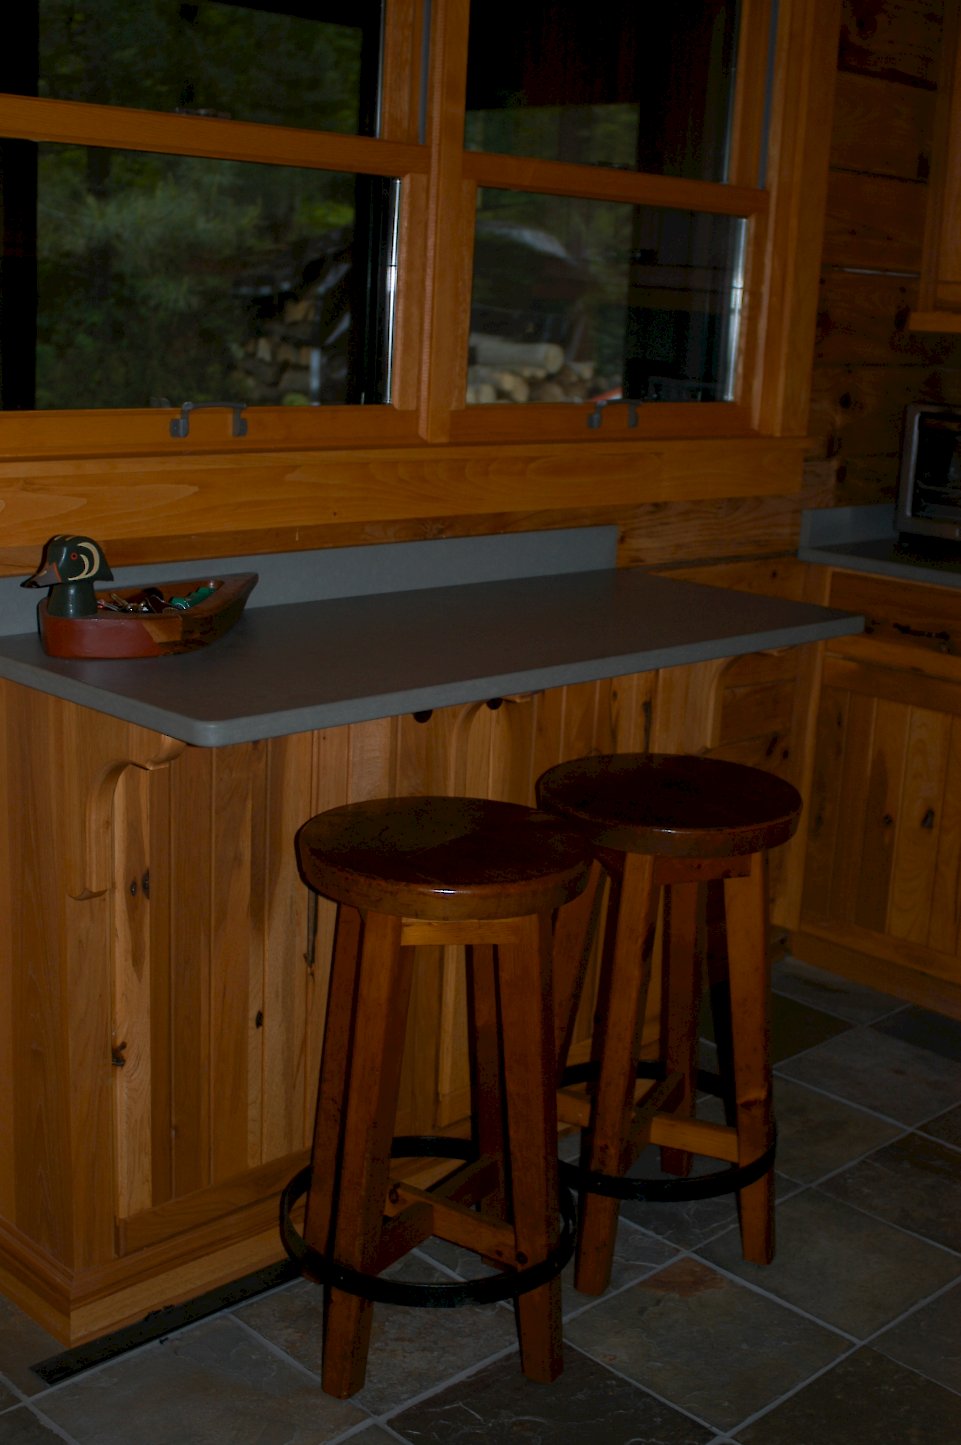 A breakfast nook on the side of the kitchen.